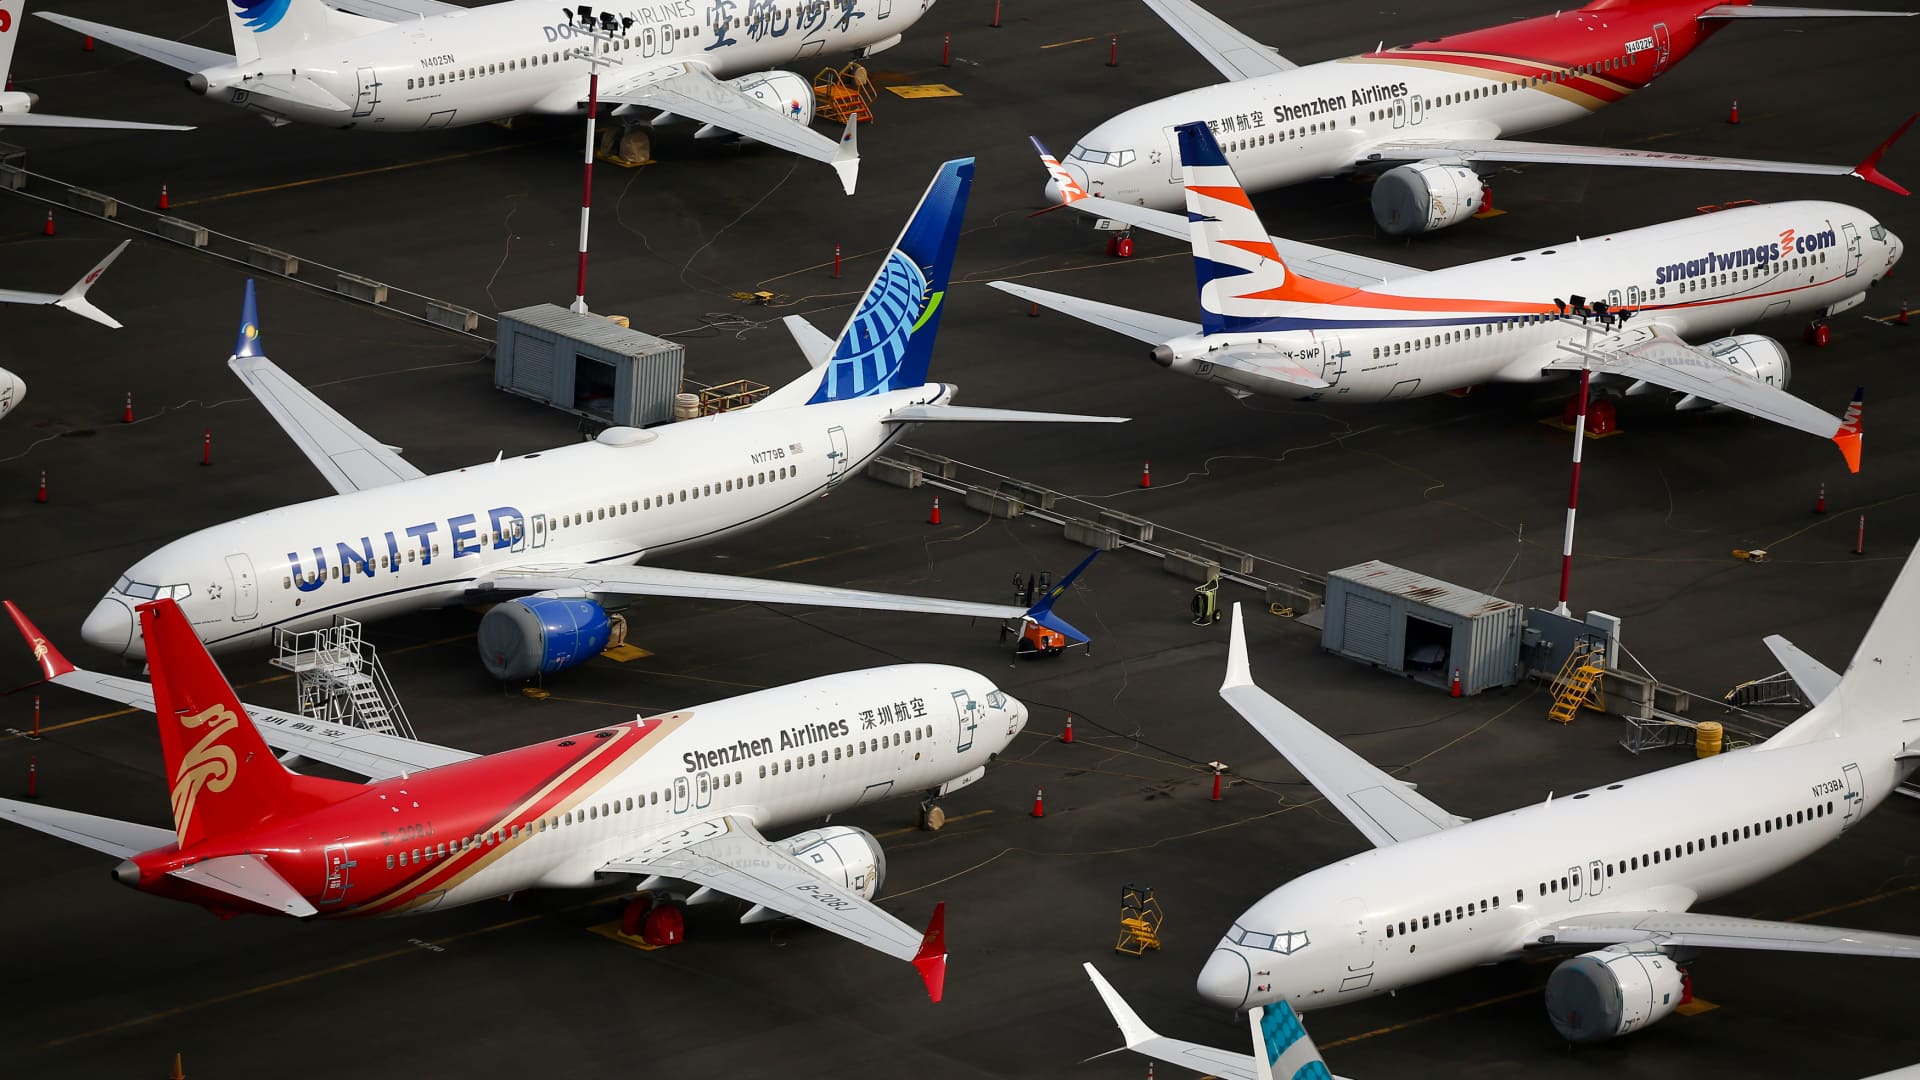 Boeing CEO says supply chain issues are hindering 737 Max production increase